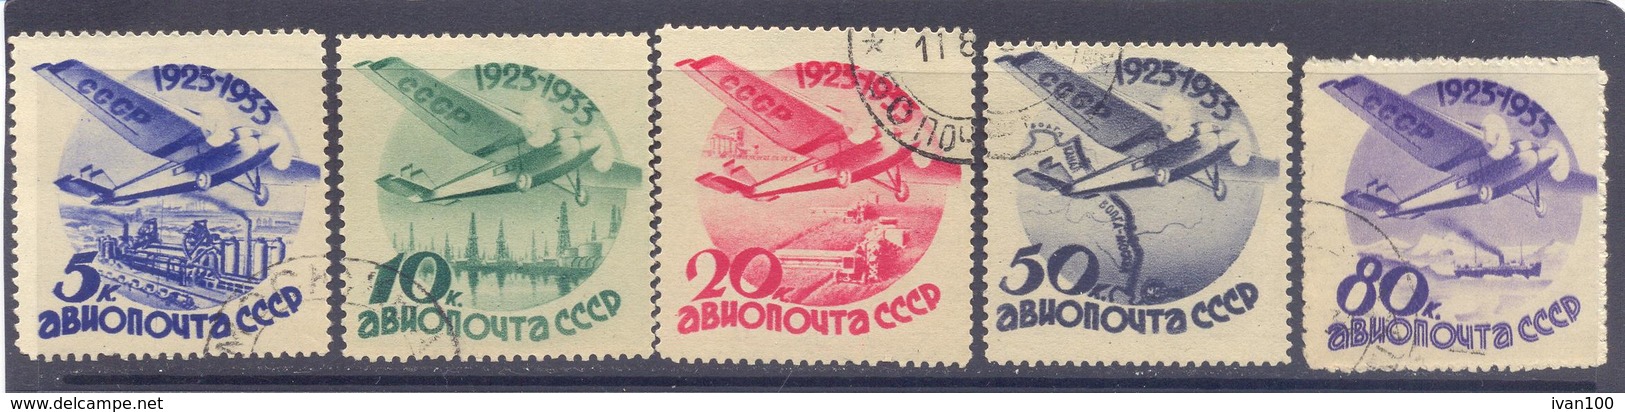 1934. USSR/Russia, 10th Anniv. Of Soviet Civil Aviation And USSR Air-mail Service, Mich.462/66v, Used - Usati